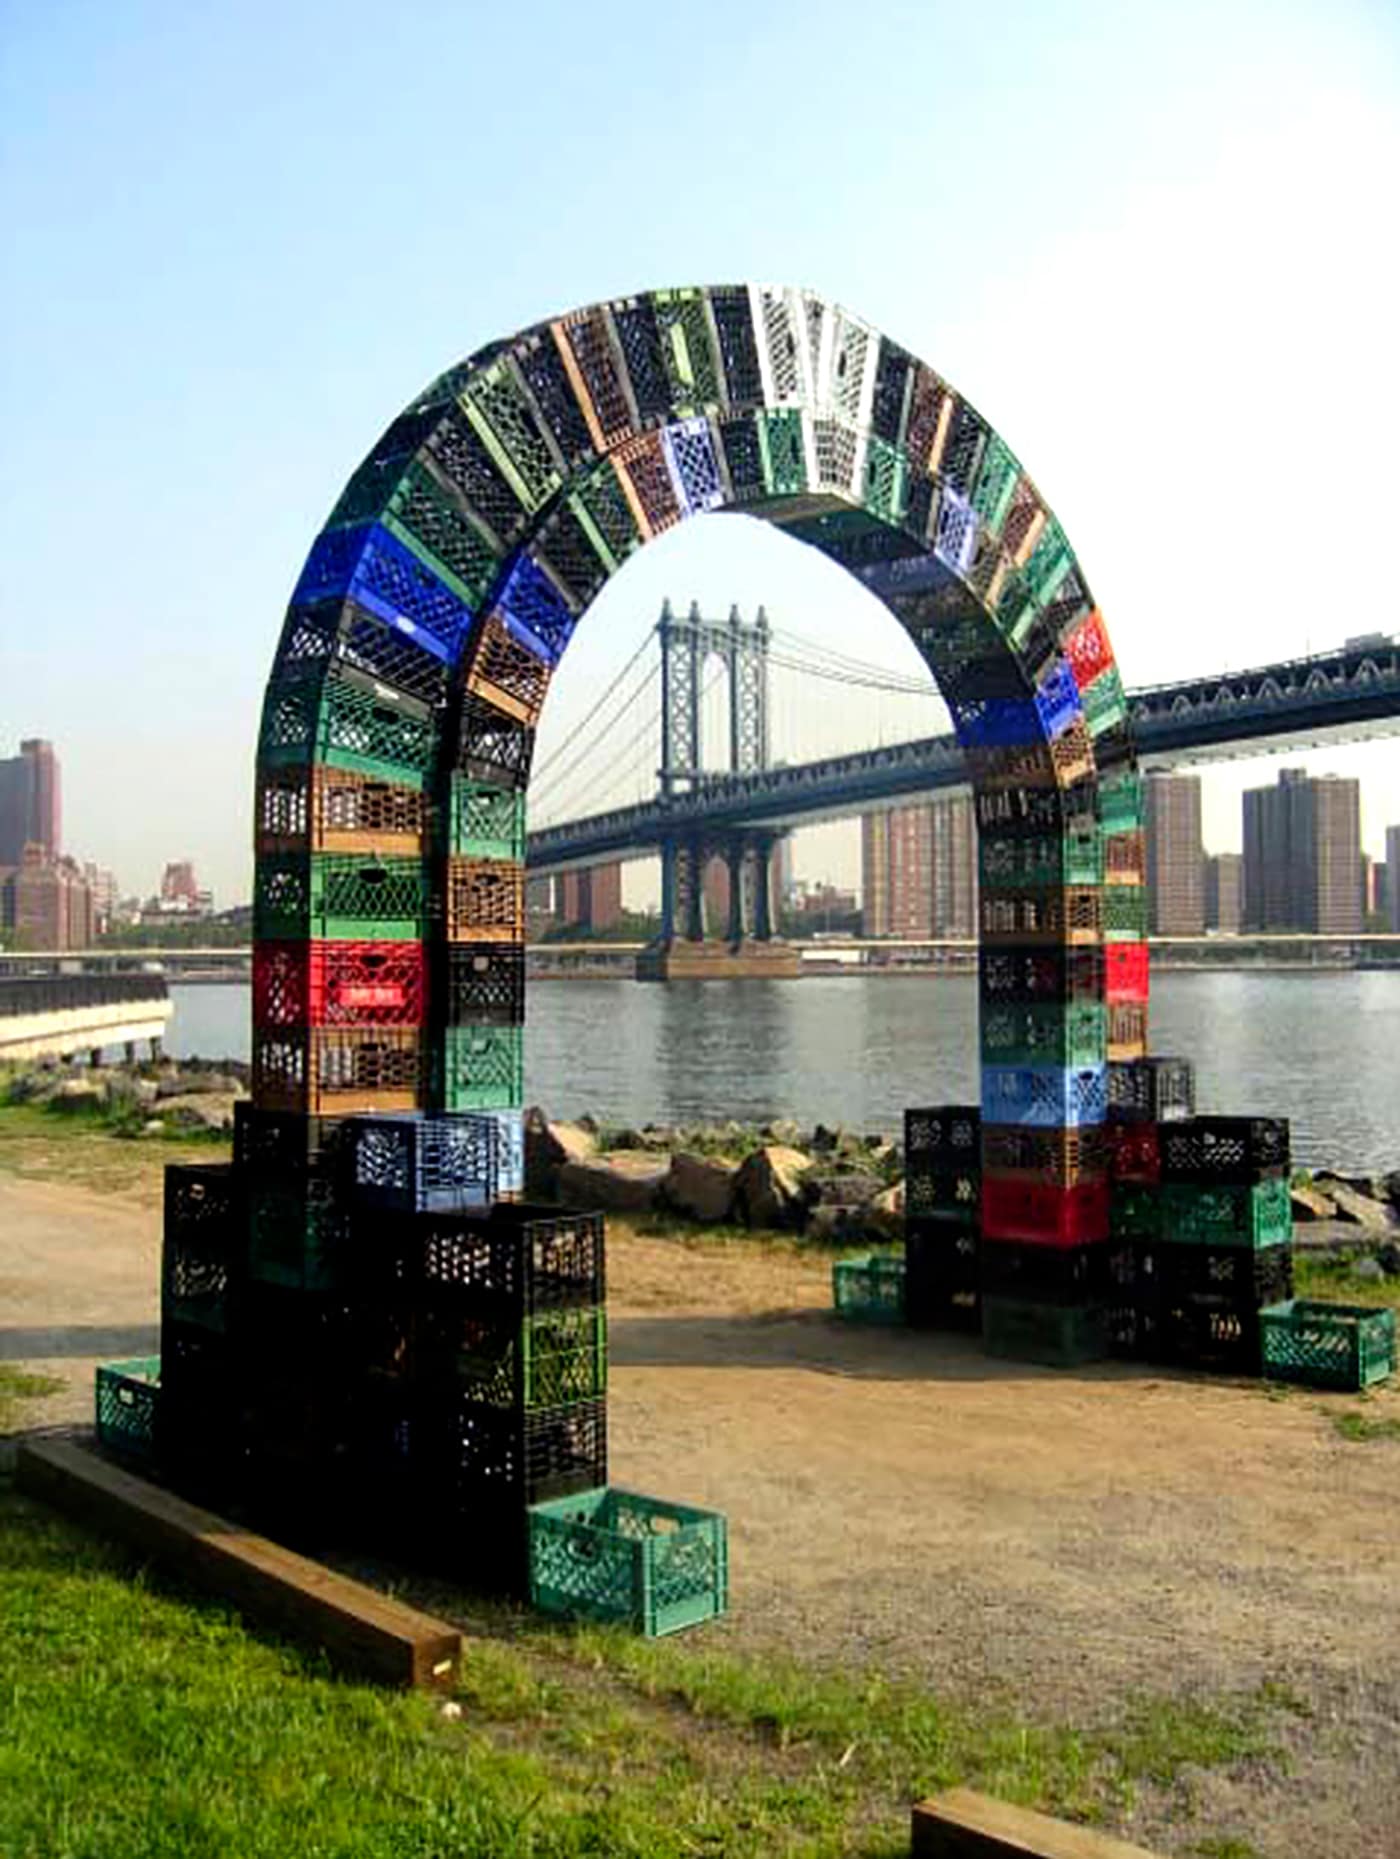 Arch of milk crates in New York